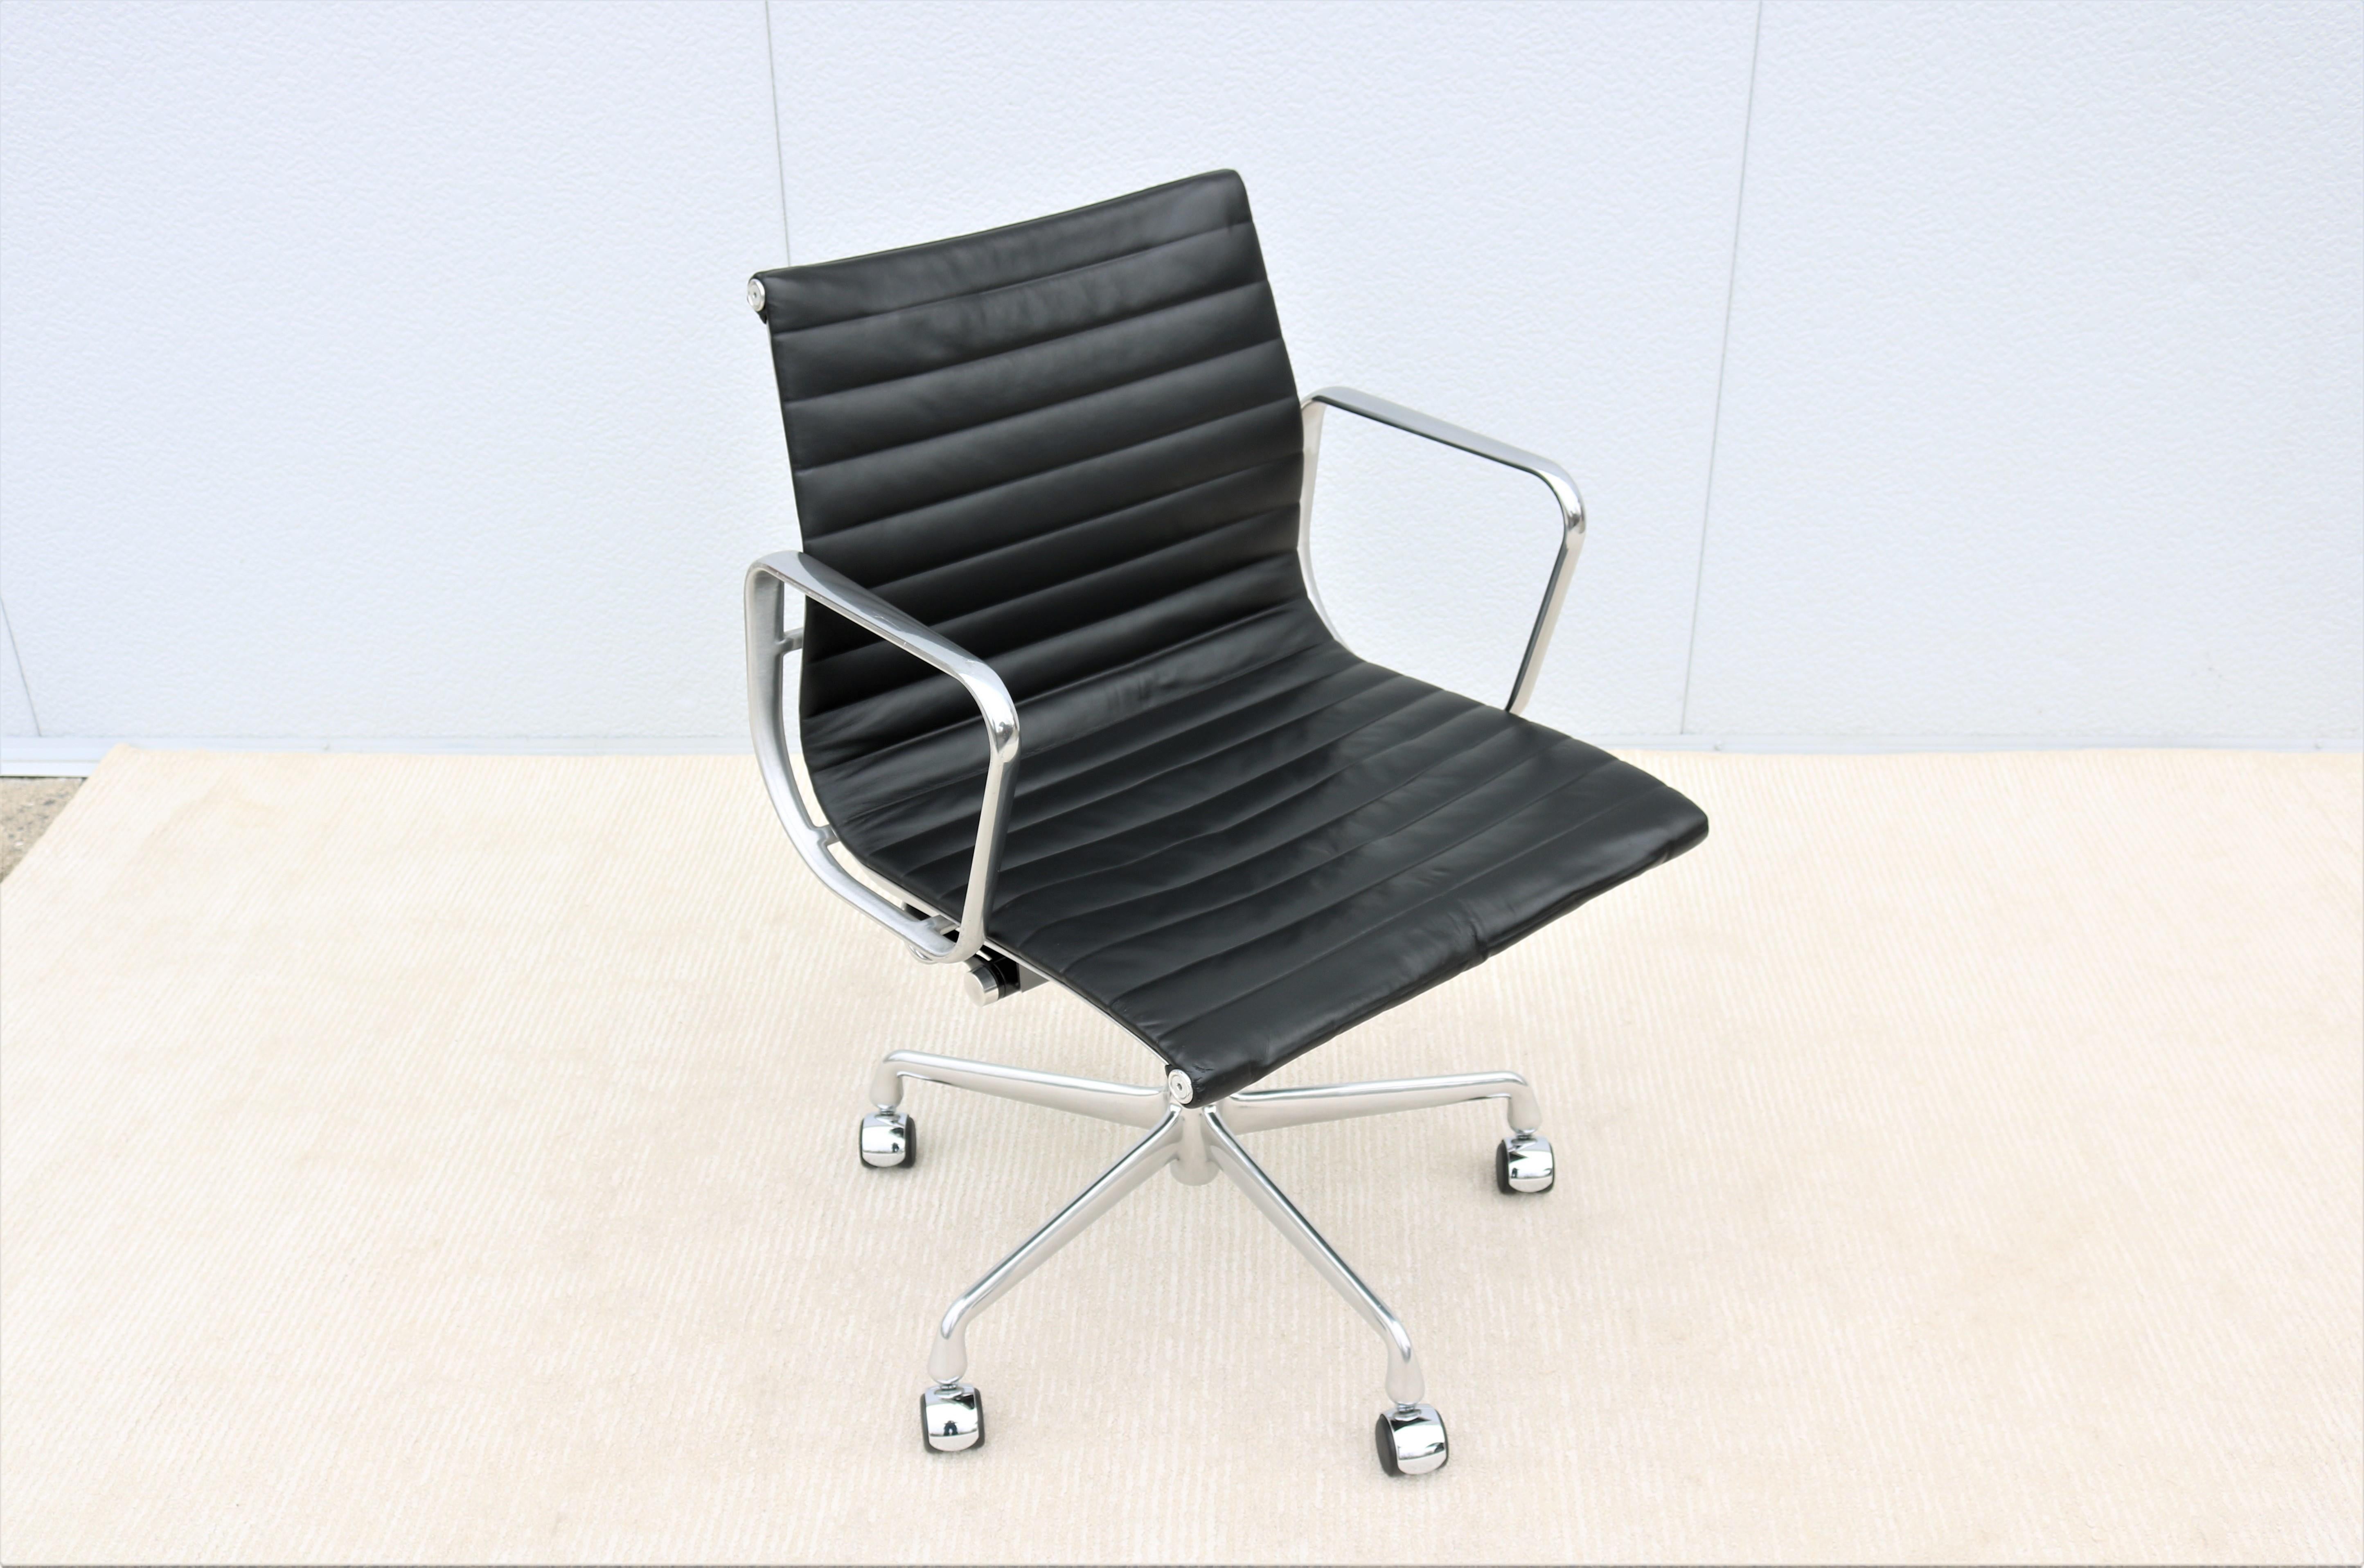 Stunning authentic Mid-Century Modern Eames aluminum group management chair.
A timeless design Classic and contemporary with Innovative comfort features.
One of Herman Miller most popular chairs was designed in 1958 by Charles and Ray